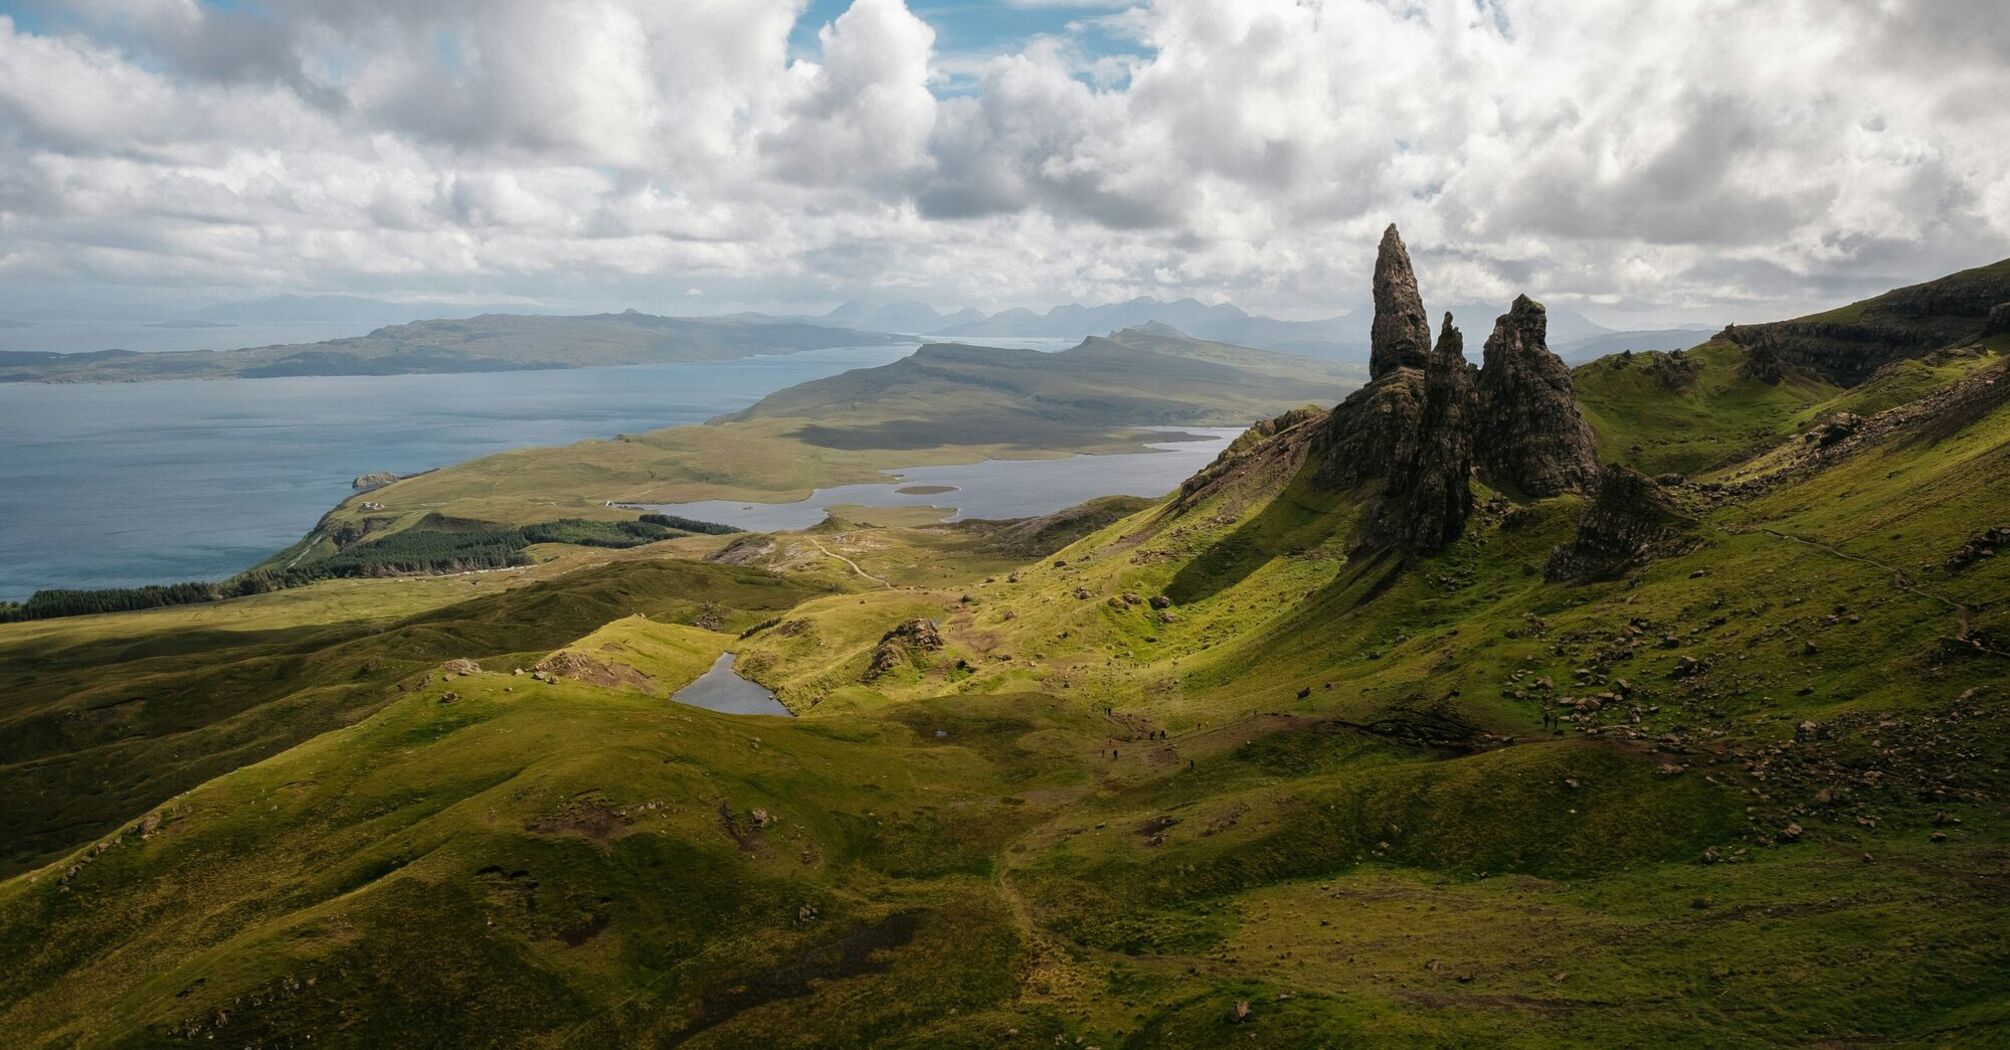 Looking out over the Old Man of Storr in Skye, Scotland